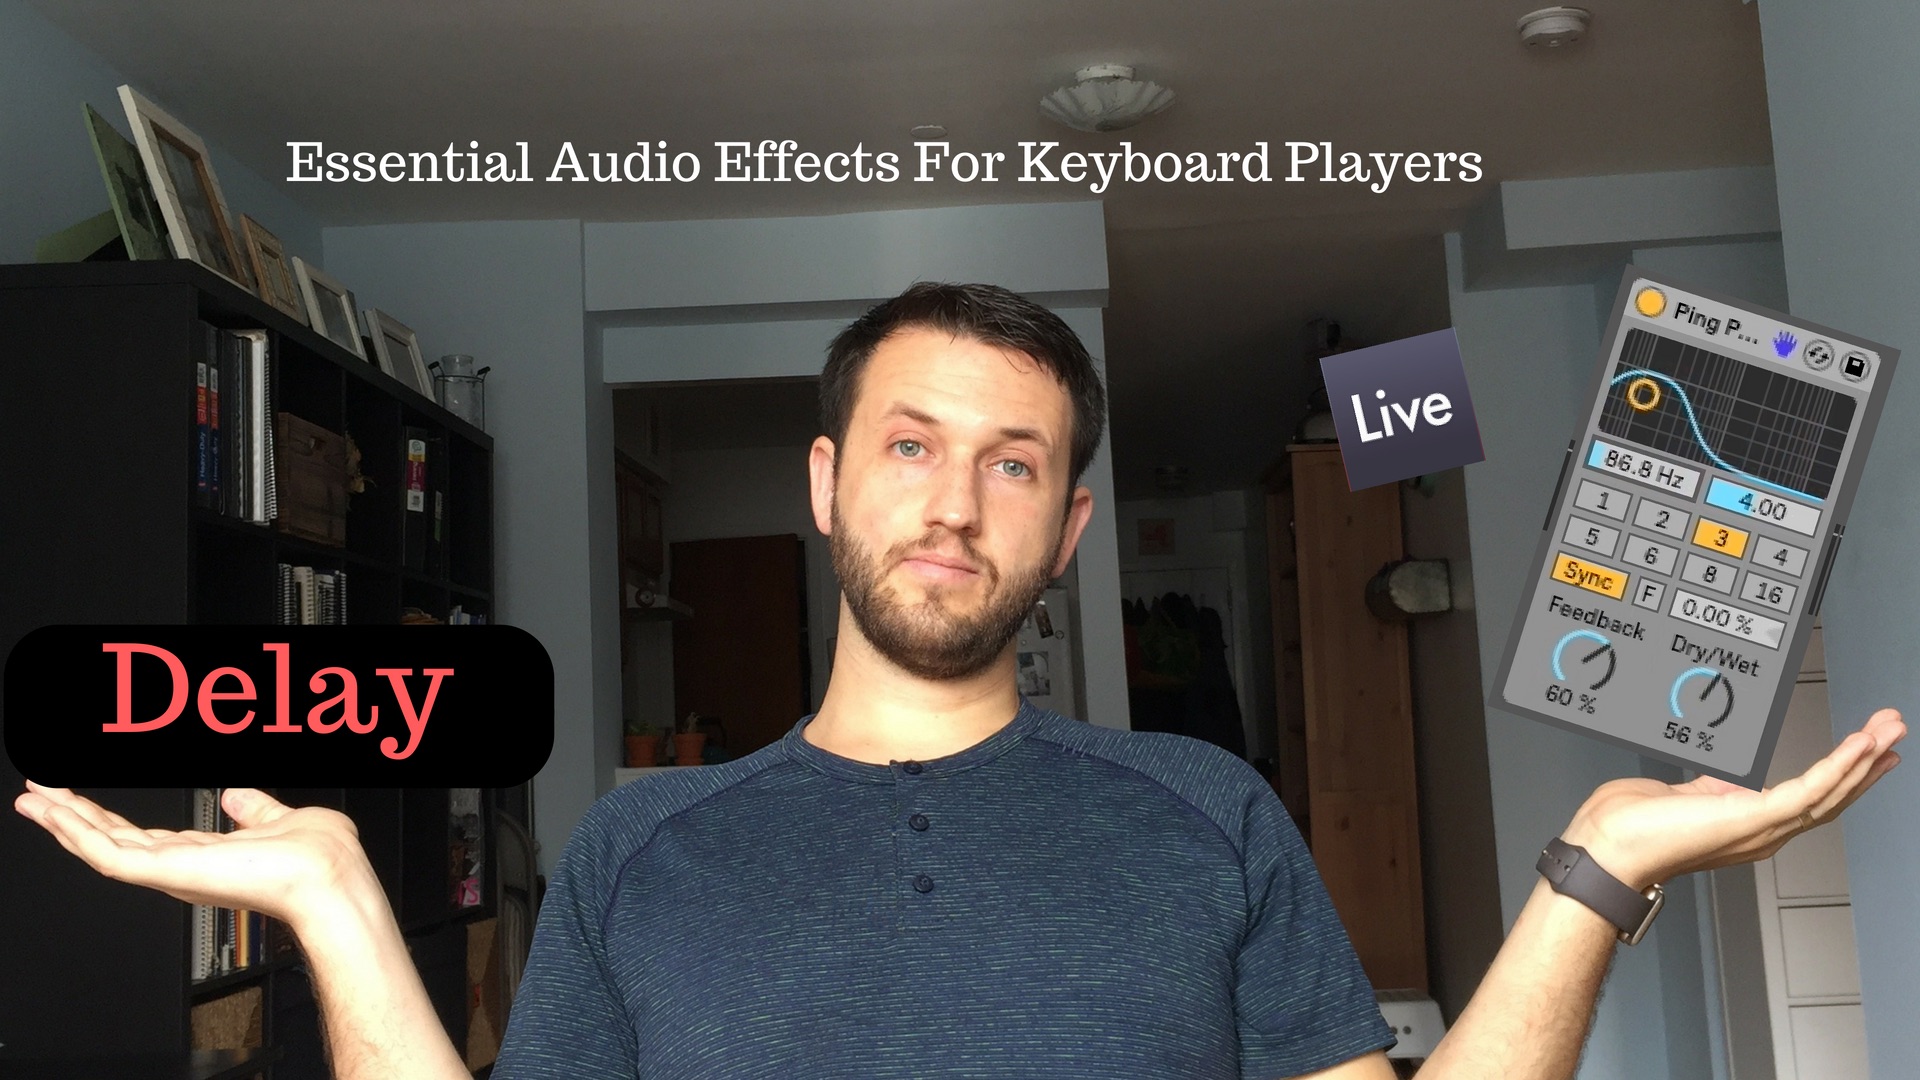 Delay: Essential Audio Effects For Keyboard Players